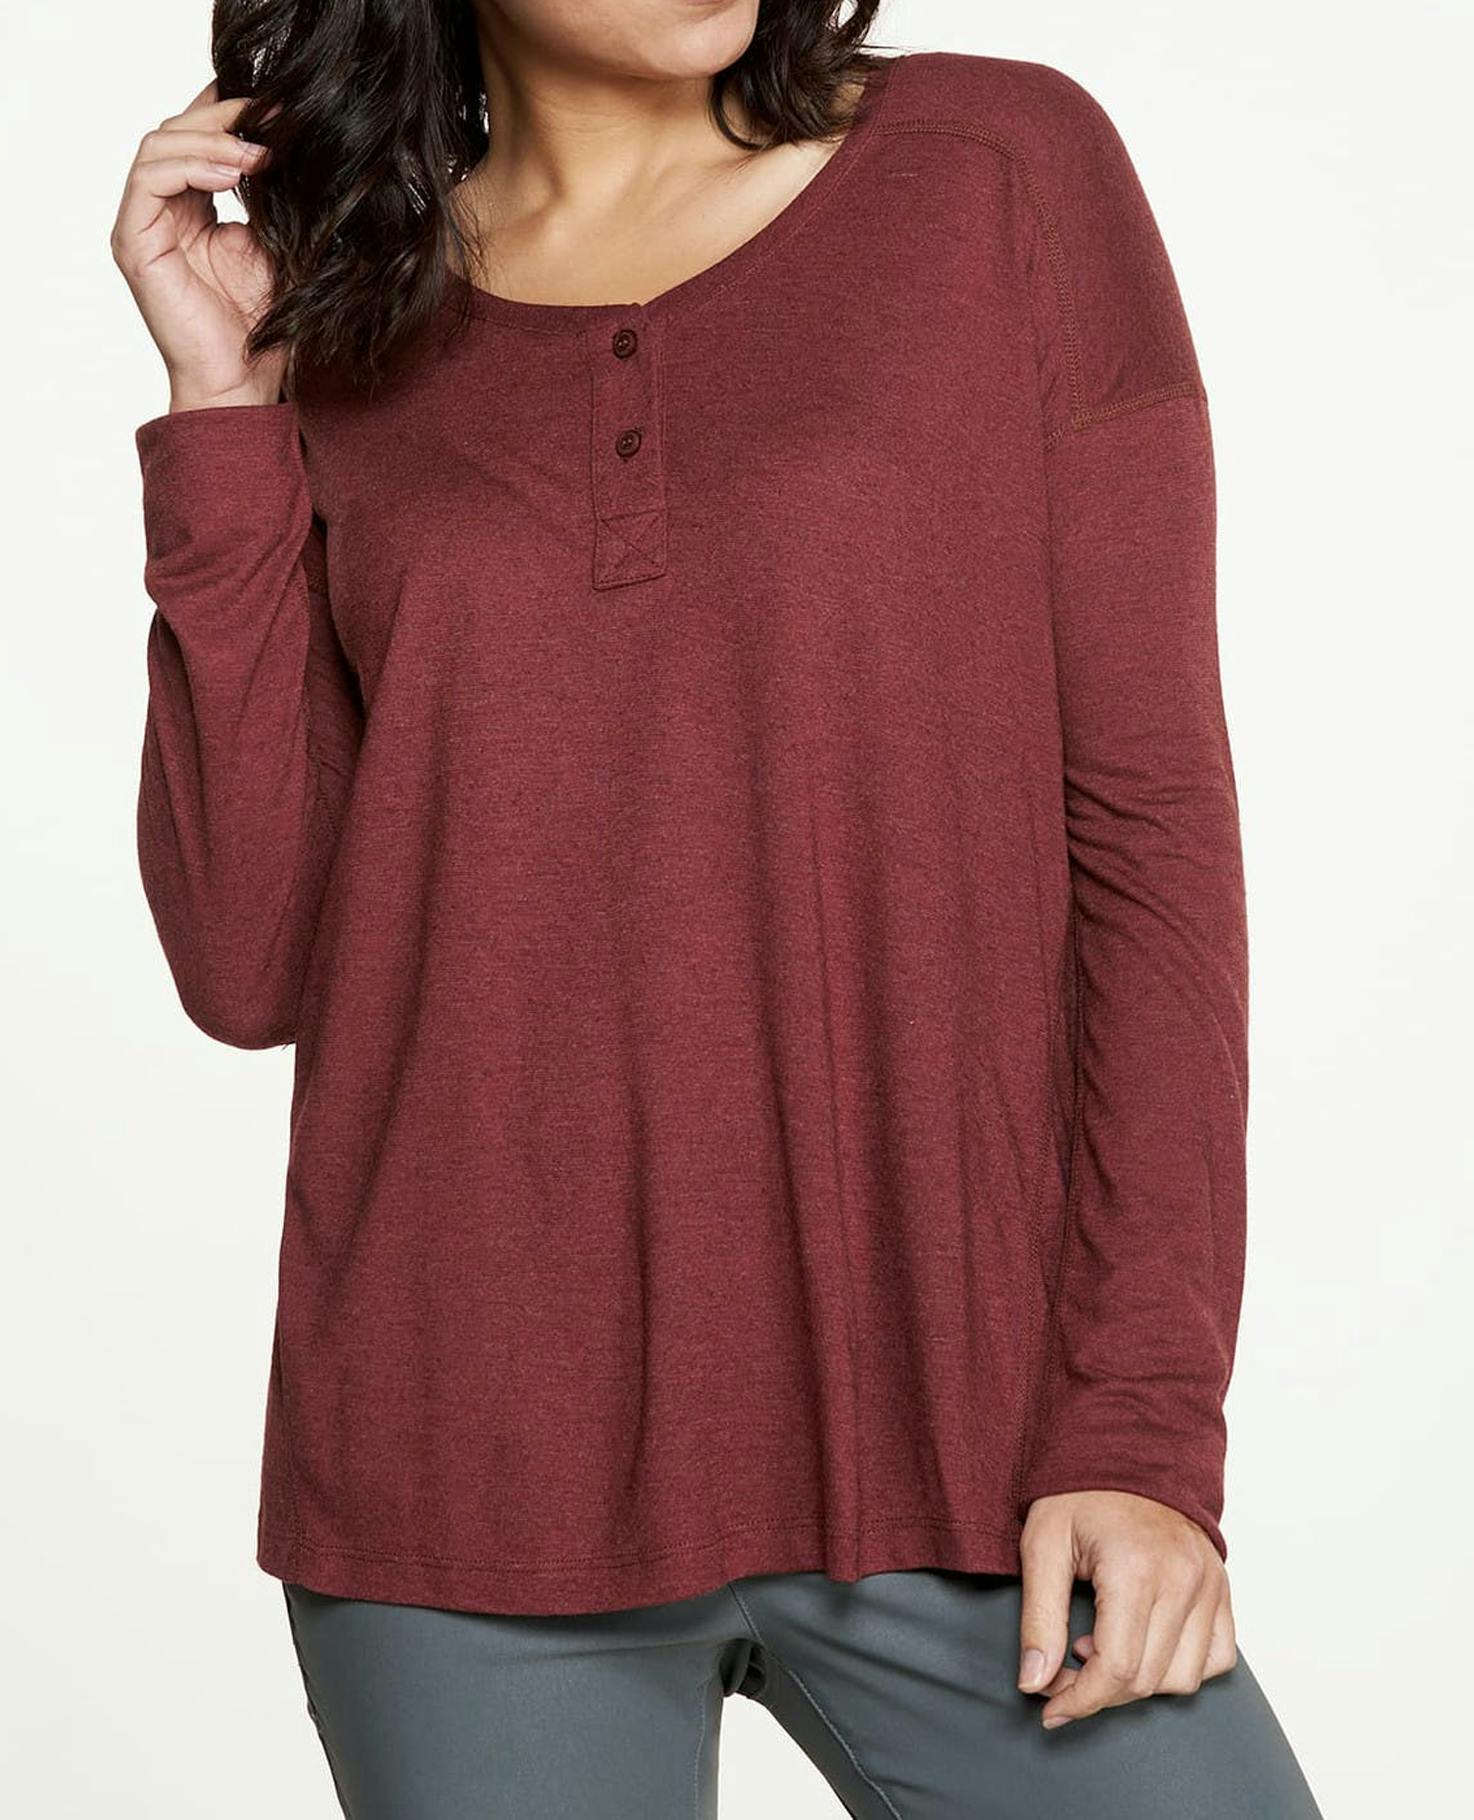 Toad&Co. Women's Aria Henley Long Sleeve Top